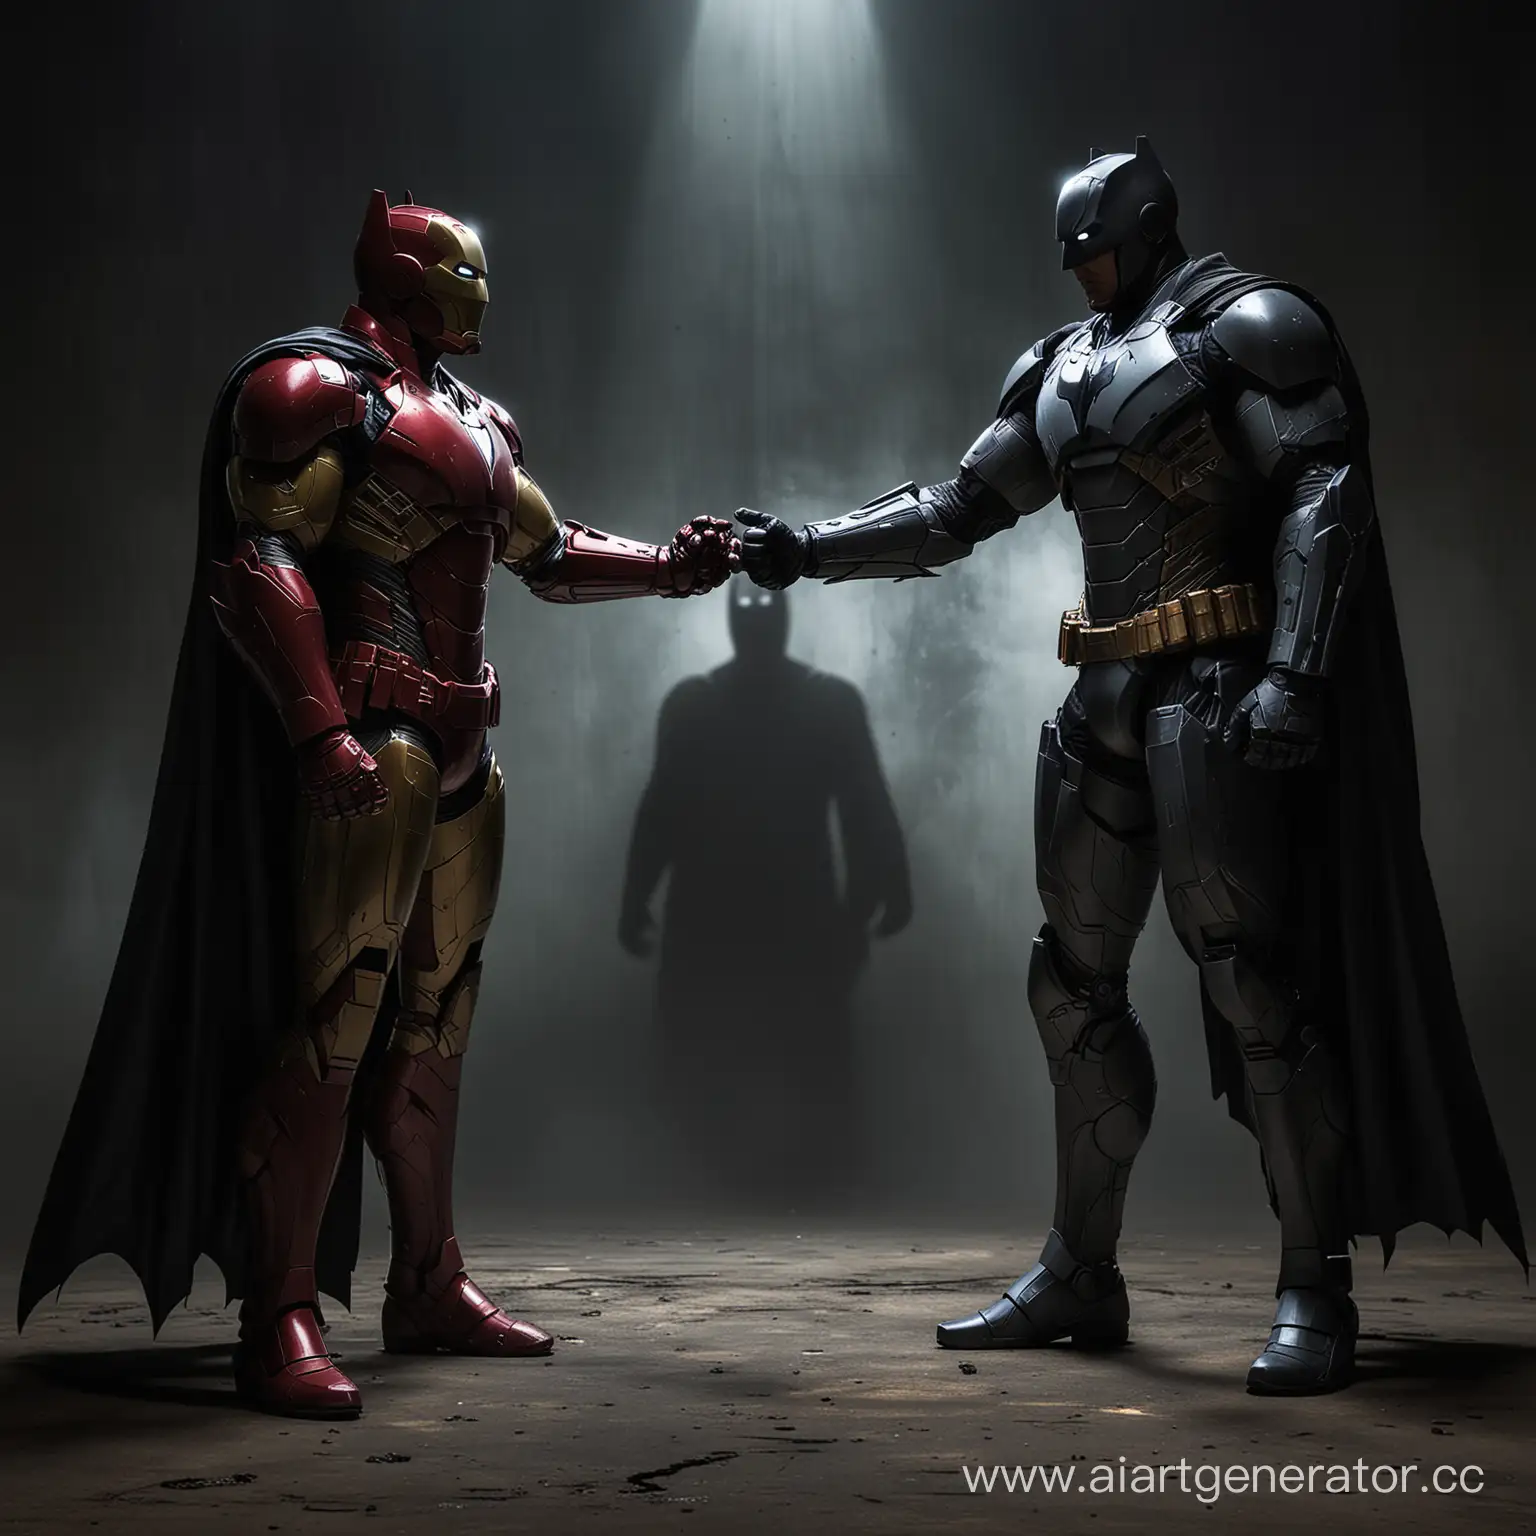 Batman and Iron Man stand at full height, facing each other, their imposing figures casting long shadows in the dimly lit space. Despite the darkness shrouding their faces, the intensity of their stares speaks volumes, each trying to gauge the other's resolve and intentions. Towering in their respective suits, they exude an aura of power and determination, ready to confront whatever challenges come their way. In this silent exchange, their silent communication speaks of mutual respect, tempered with an underlying sense of rivalry, as they stand, locked in a silent standoff, each waiting for the other to make the first move.